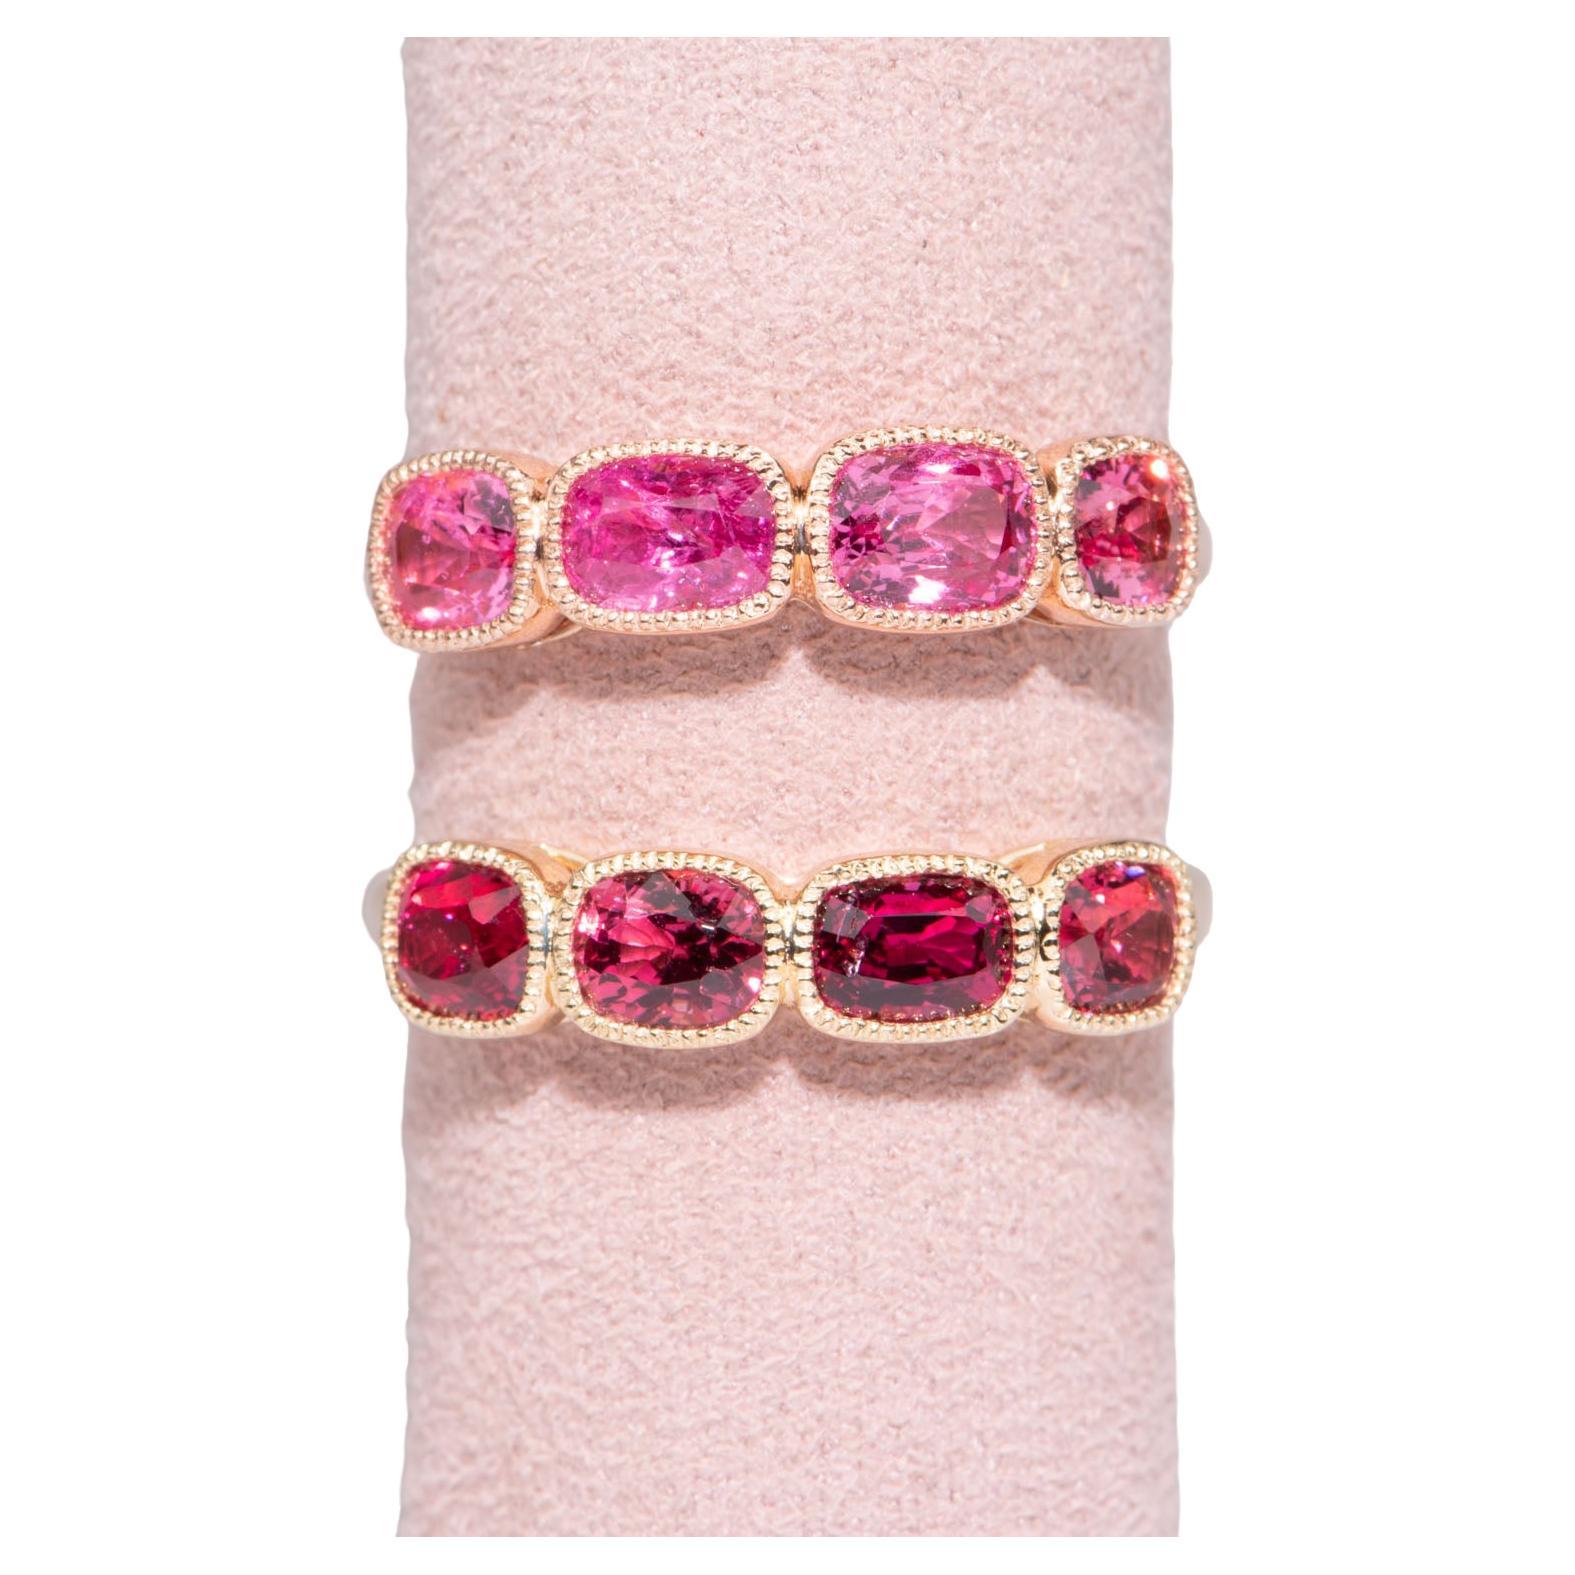 ♥ Bright Pink Red Spinel Milgrain Bezel Set Wedding Band 14K Gold
♥ The design measures 4.9mm in length (North South direction), 19.4mm in width (East West direction), and sits 4.1mm tall from the finger. Band width is 1.9mm.
♥ Ring size: US 7 (Free